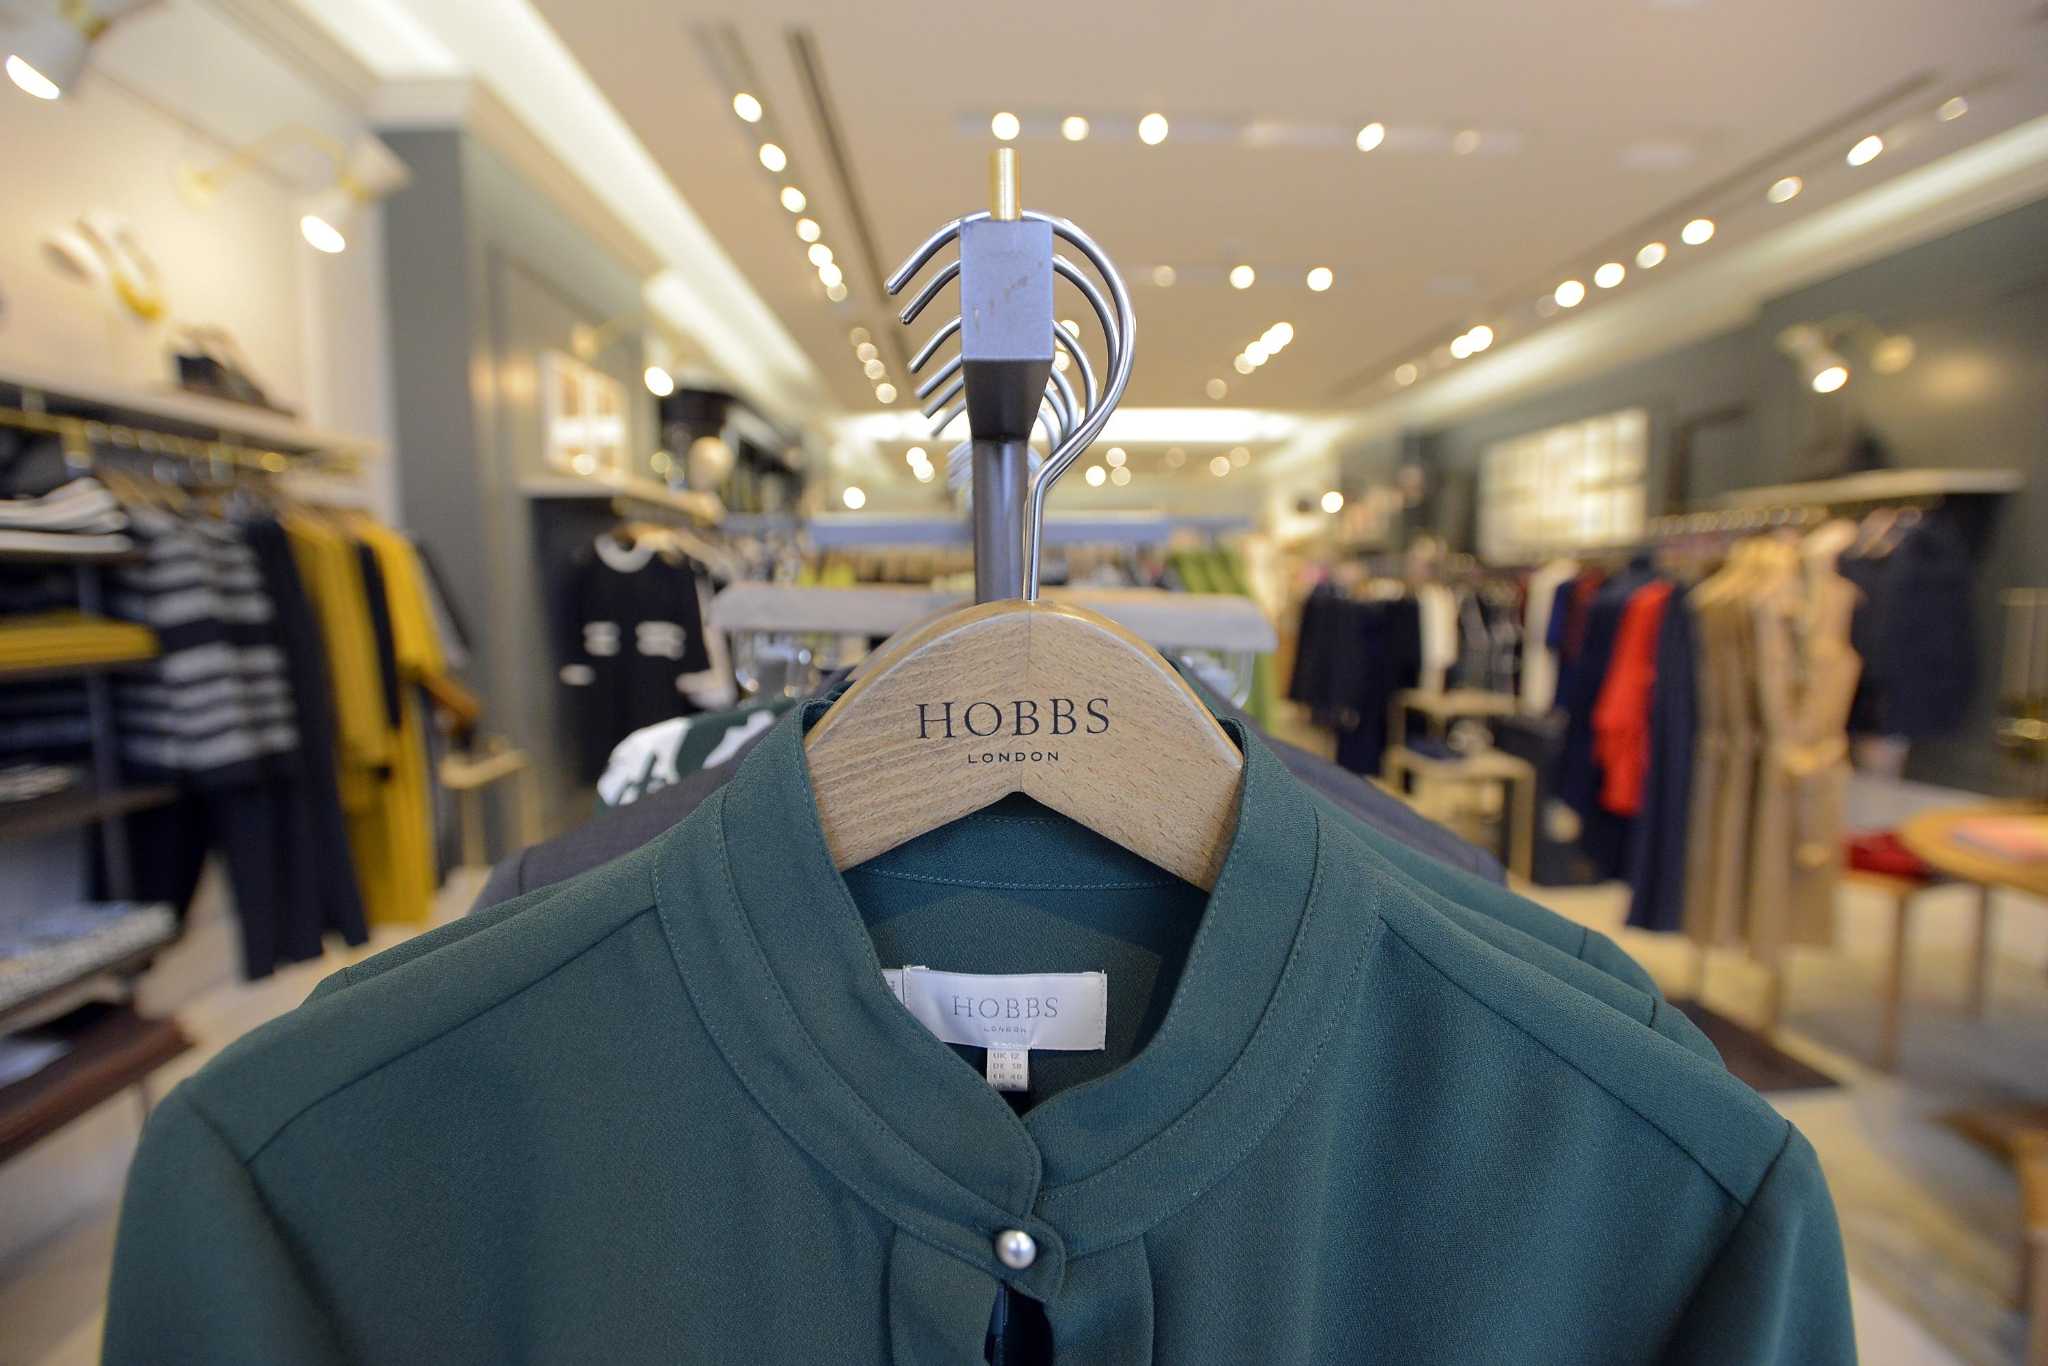 Fit for a duchess: Hobbs fashion brand opens in Greenwich